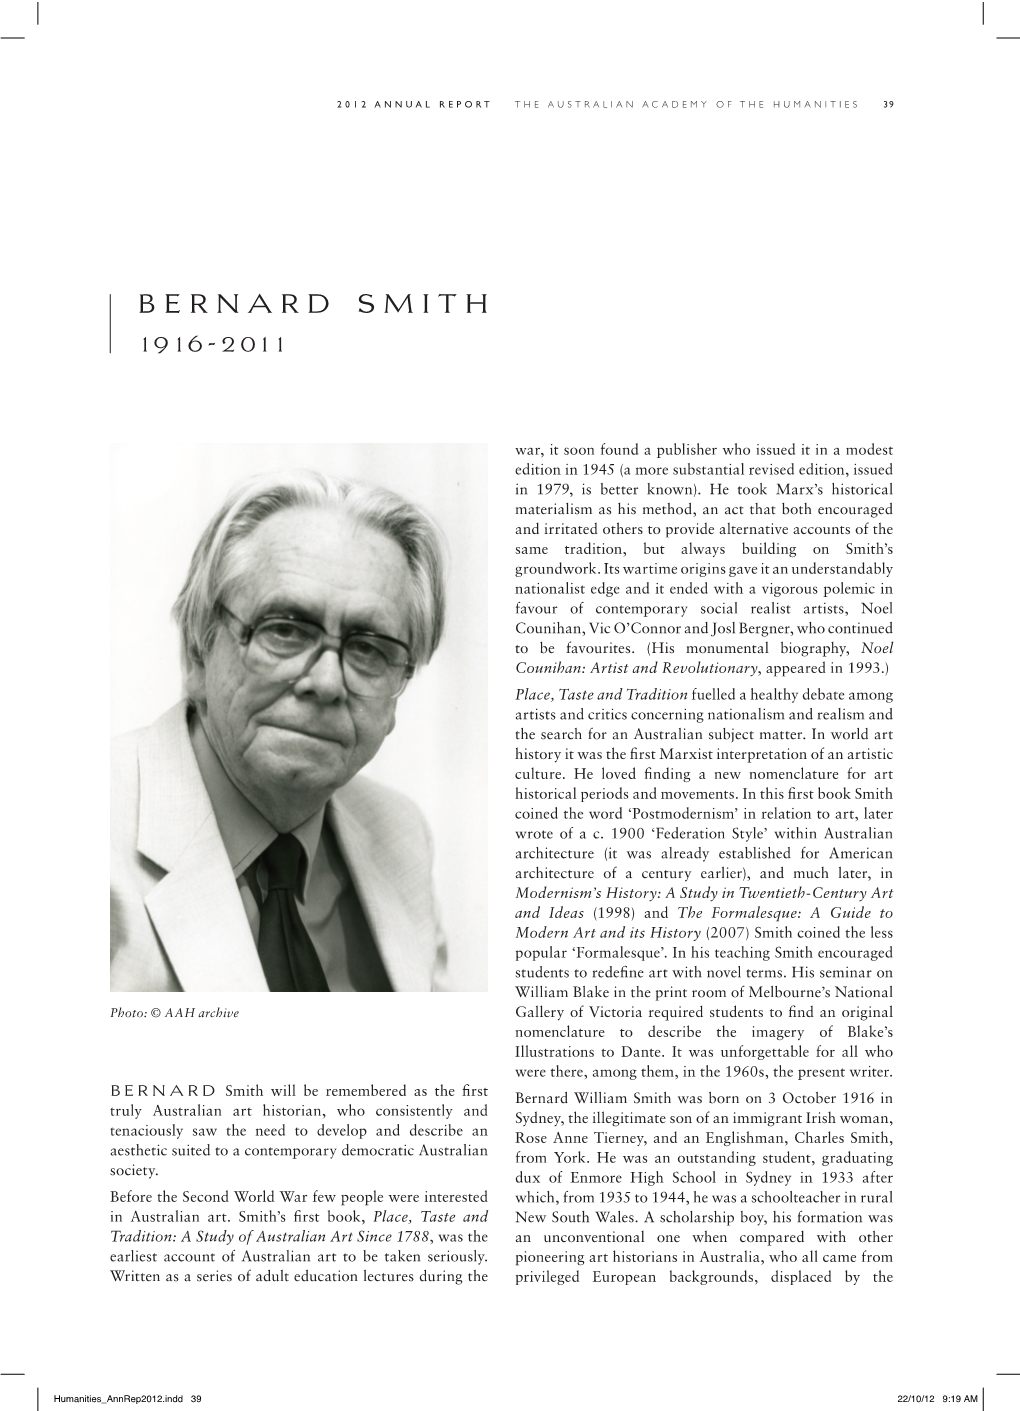 Bernard Smith Was Appointed As a Lecturer to the Reconsideration of French and British Utopian Socialists